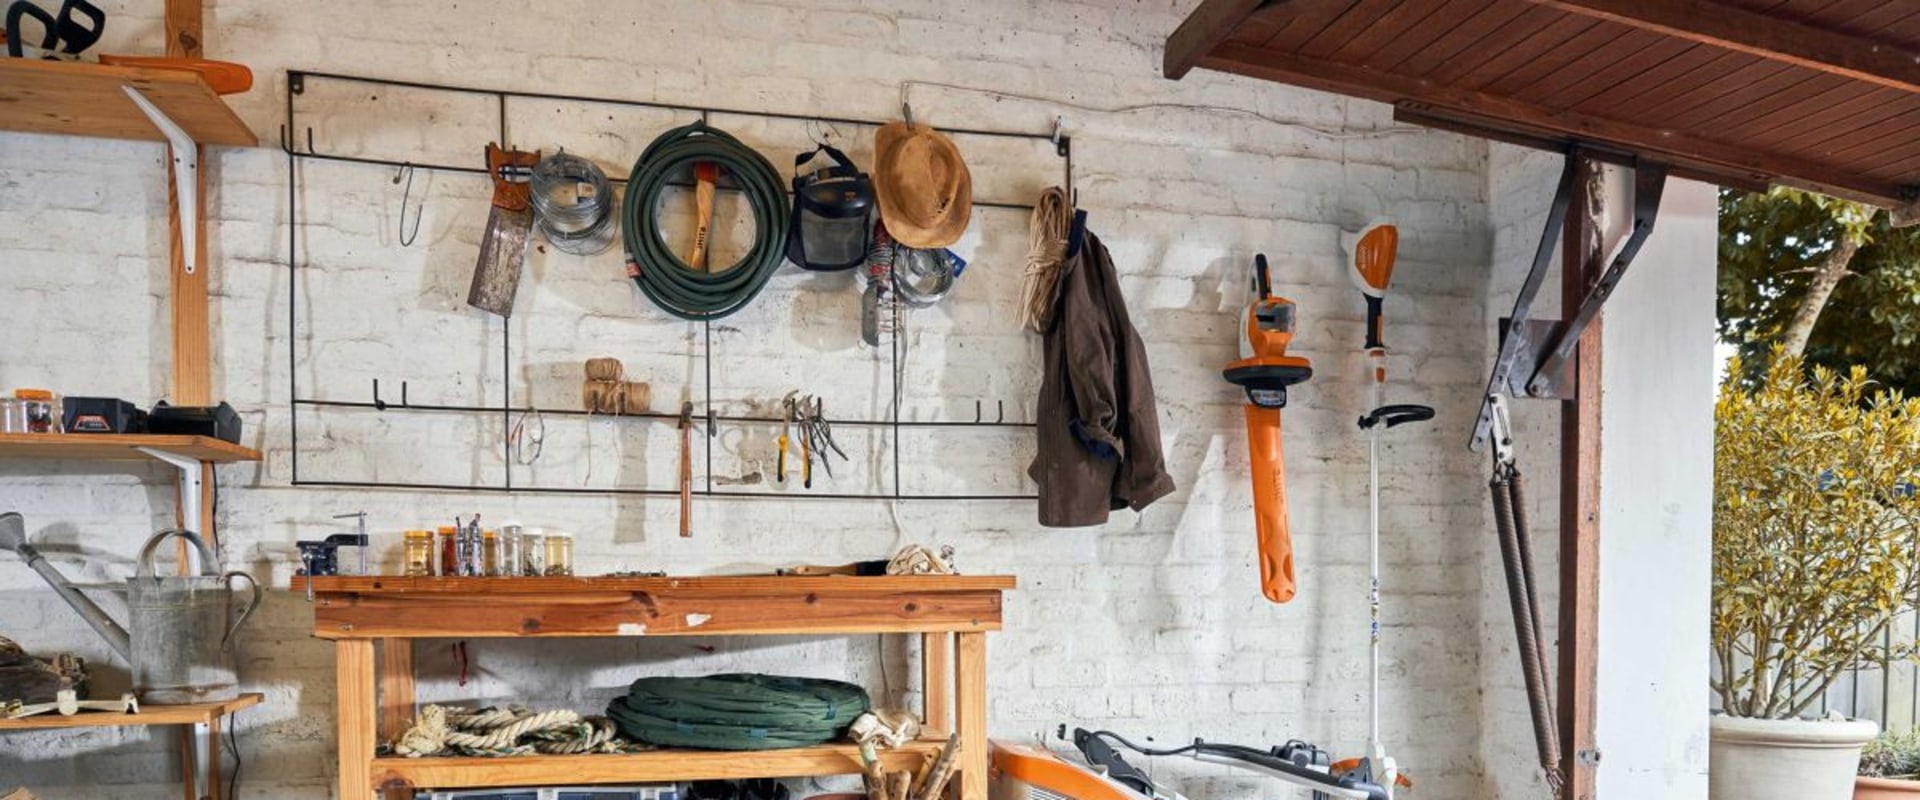 Building where hand tools are being stored?